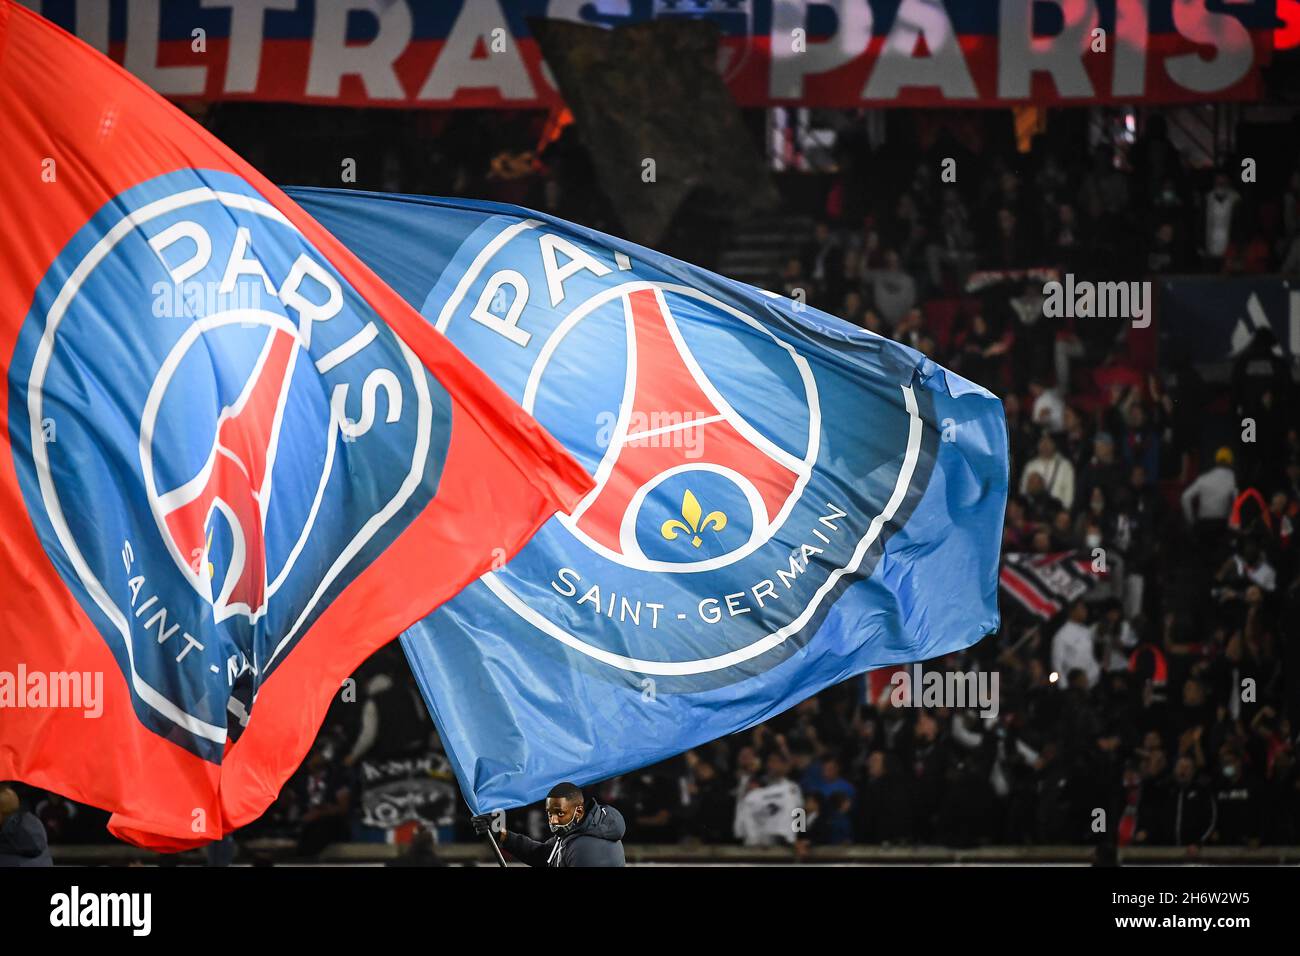 Illustration of the official flags of PSG and supporters during the French  championship Ligue 1 football match between Paris Saint-Germain and SCO  Angers on October 15, 2021 at Parc des Princes stadium